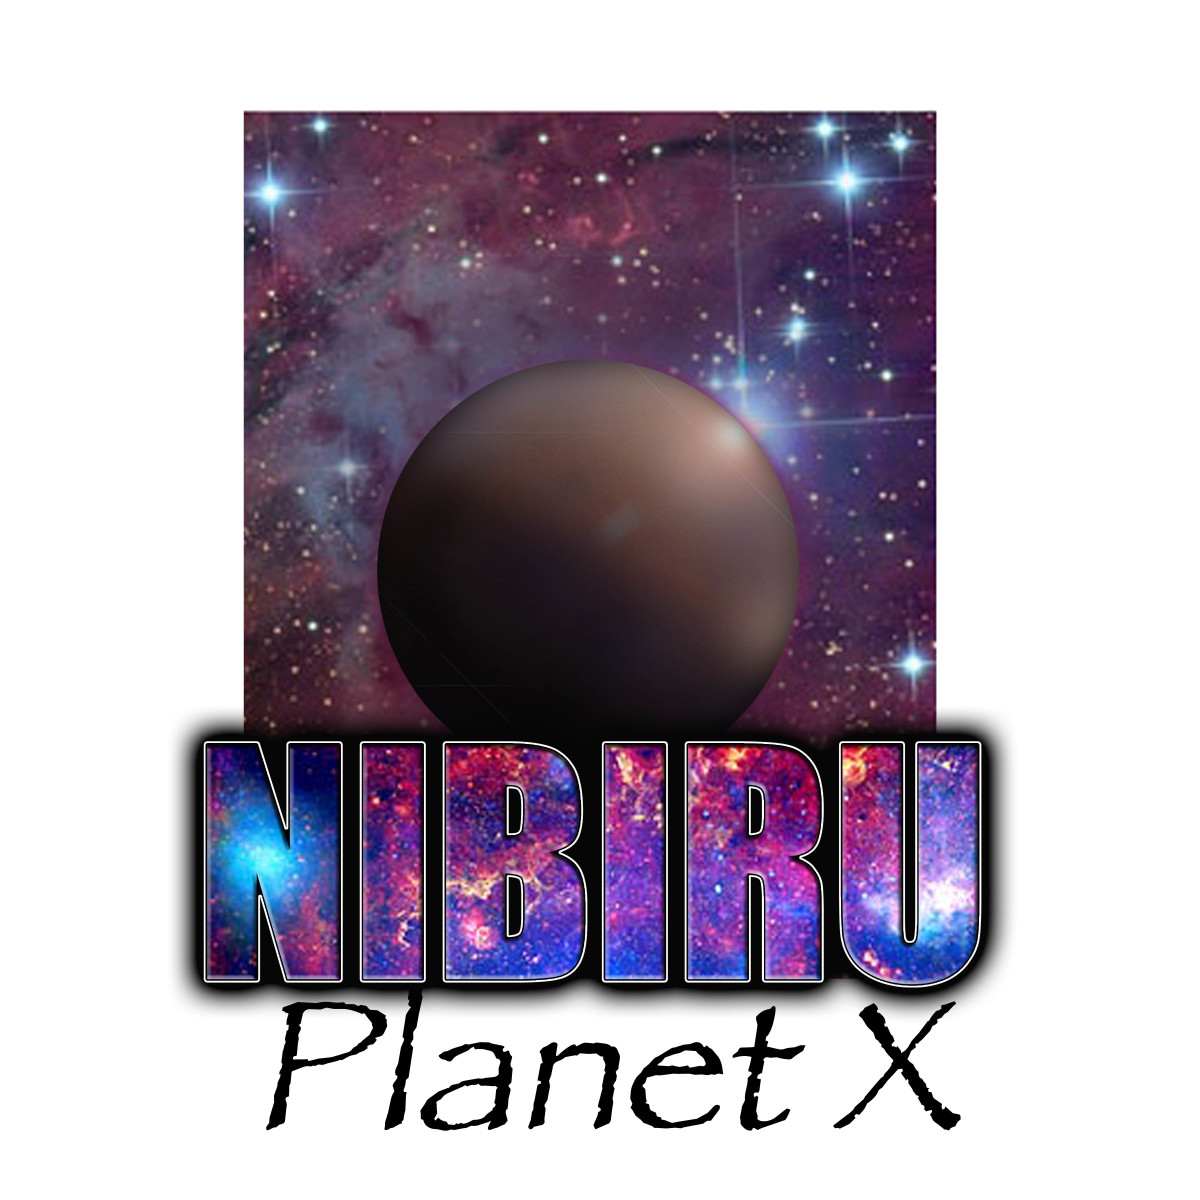 Nibiru Planet X January 20, 2013, Wandering Planets and Rising Volcanic Activity is Proof of the Polar Shift!